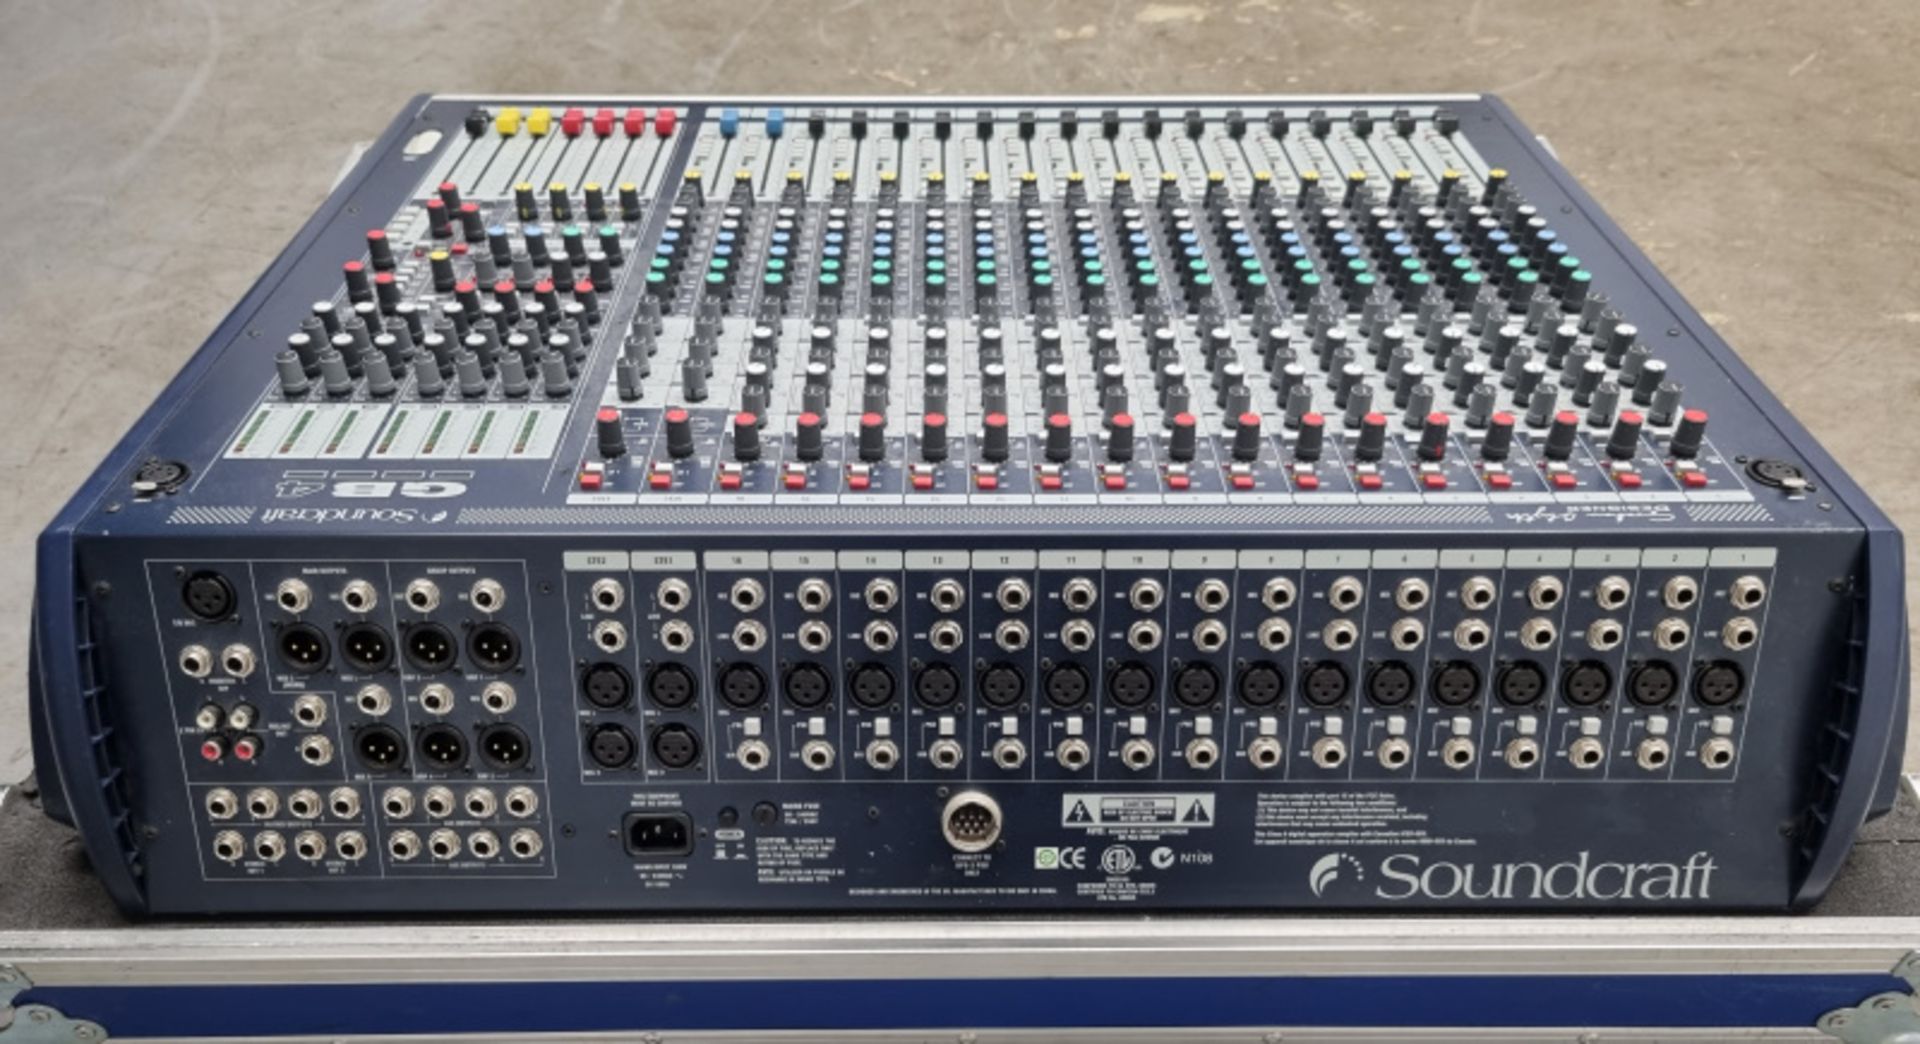 Soundcraft GB4 16 channel mixer in flight case - Image 3 of 5